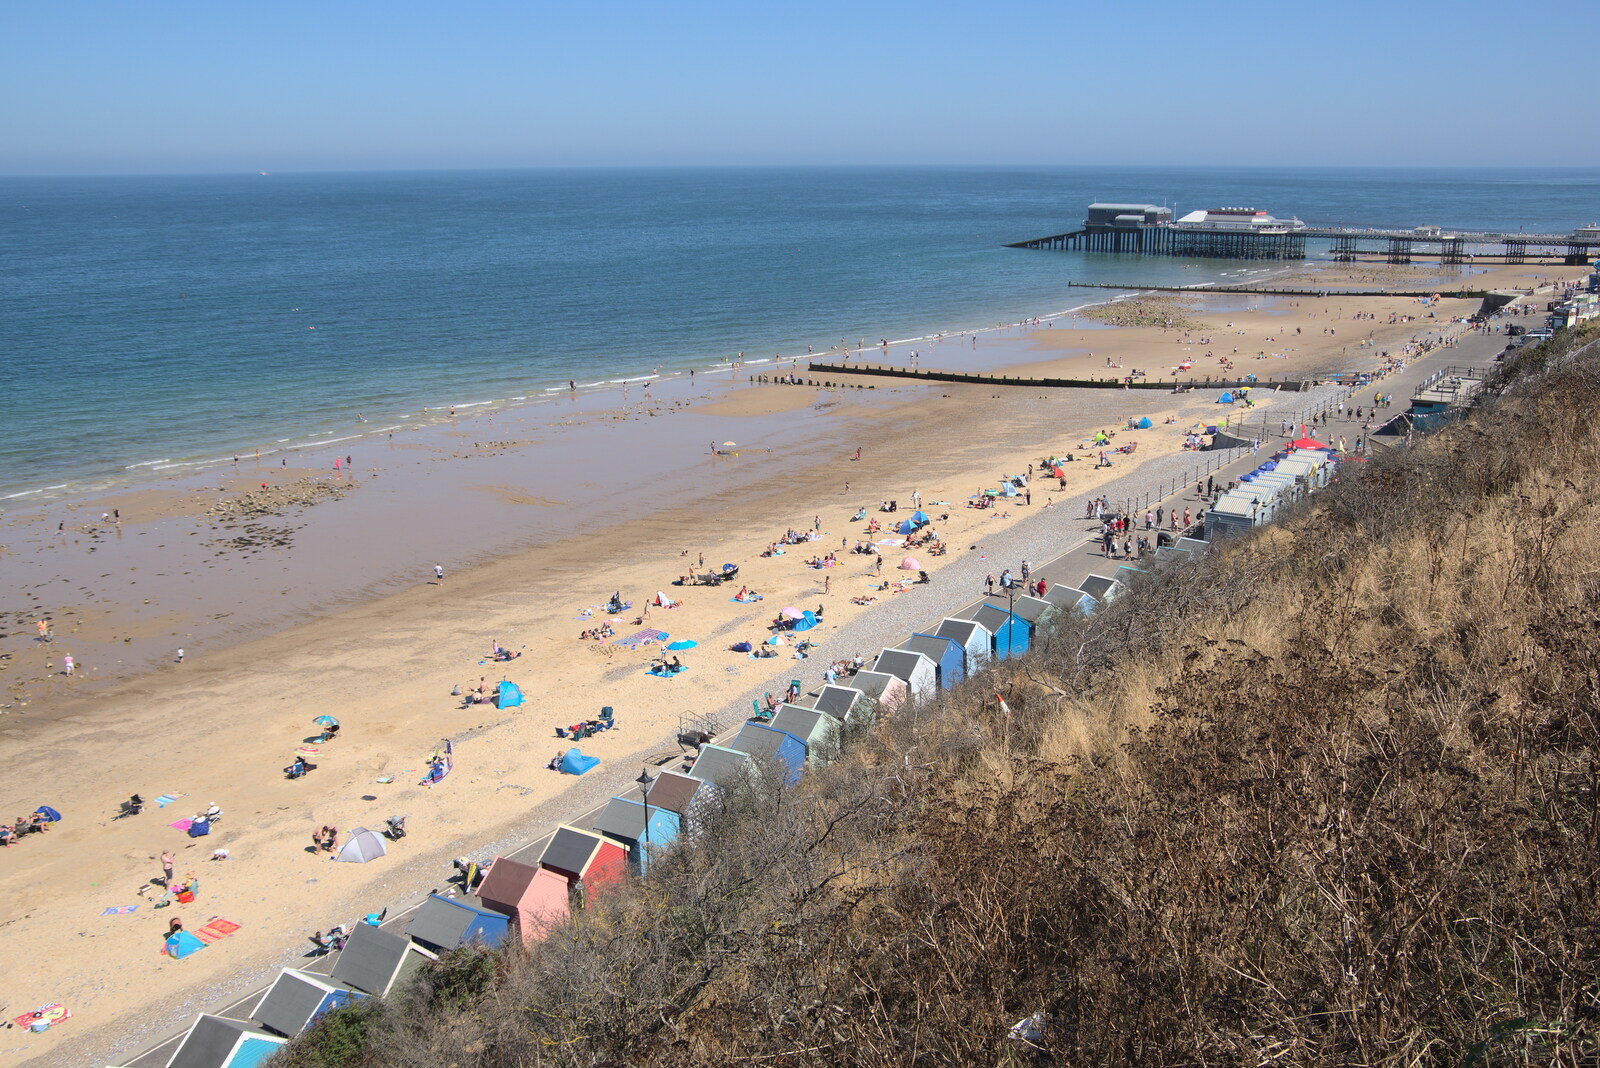 Cromer beach from the clifftop from Camping at Forest Park, Cromer, Norfolk - 12th August 2022